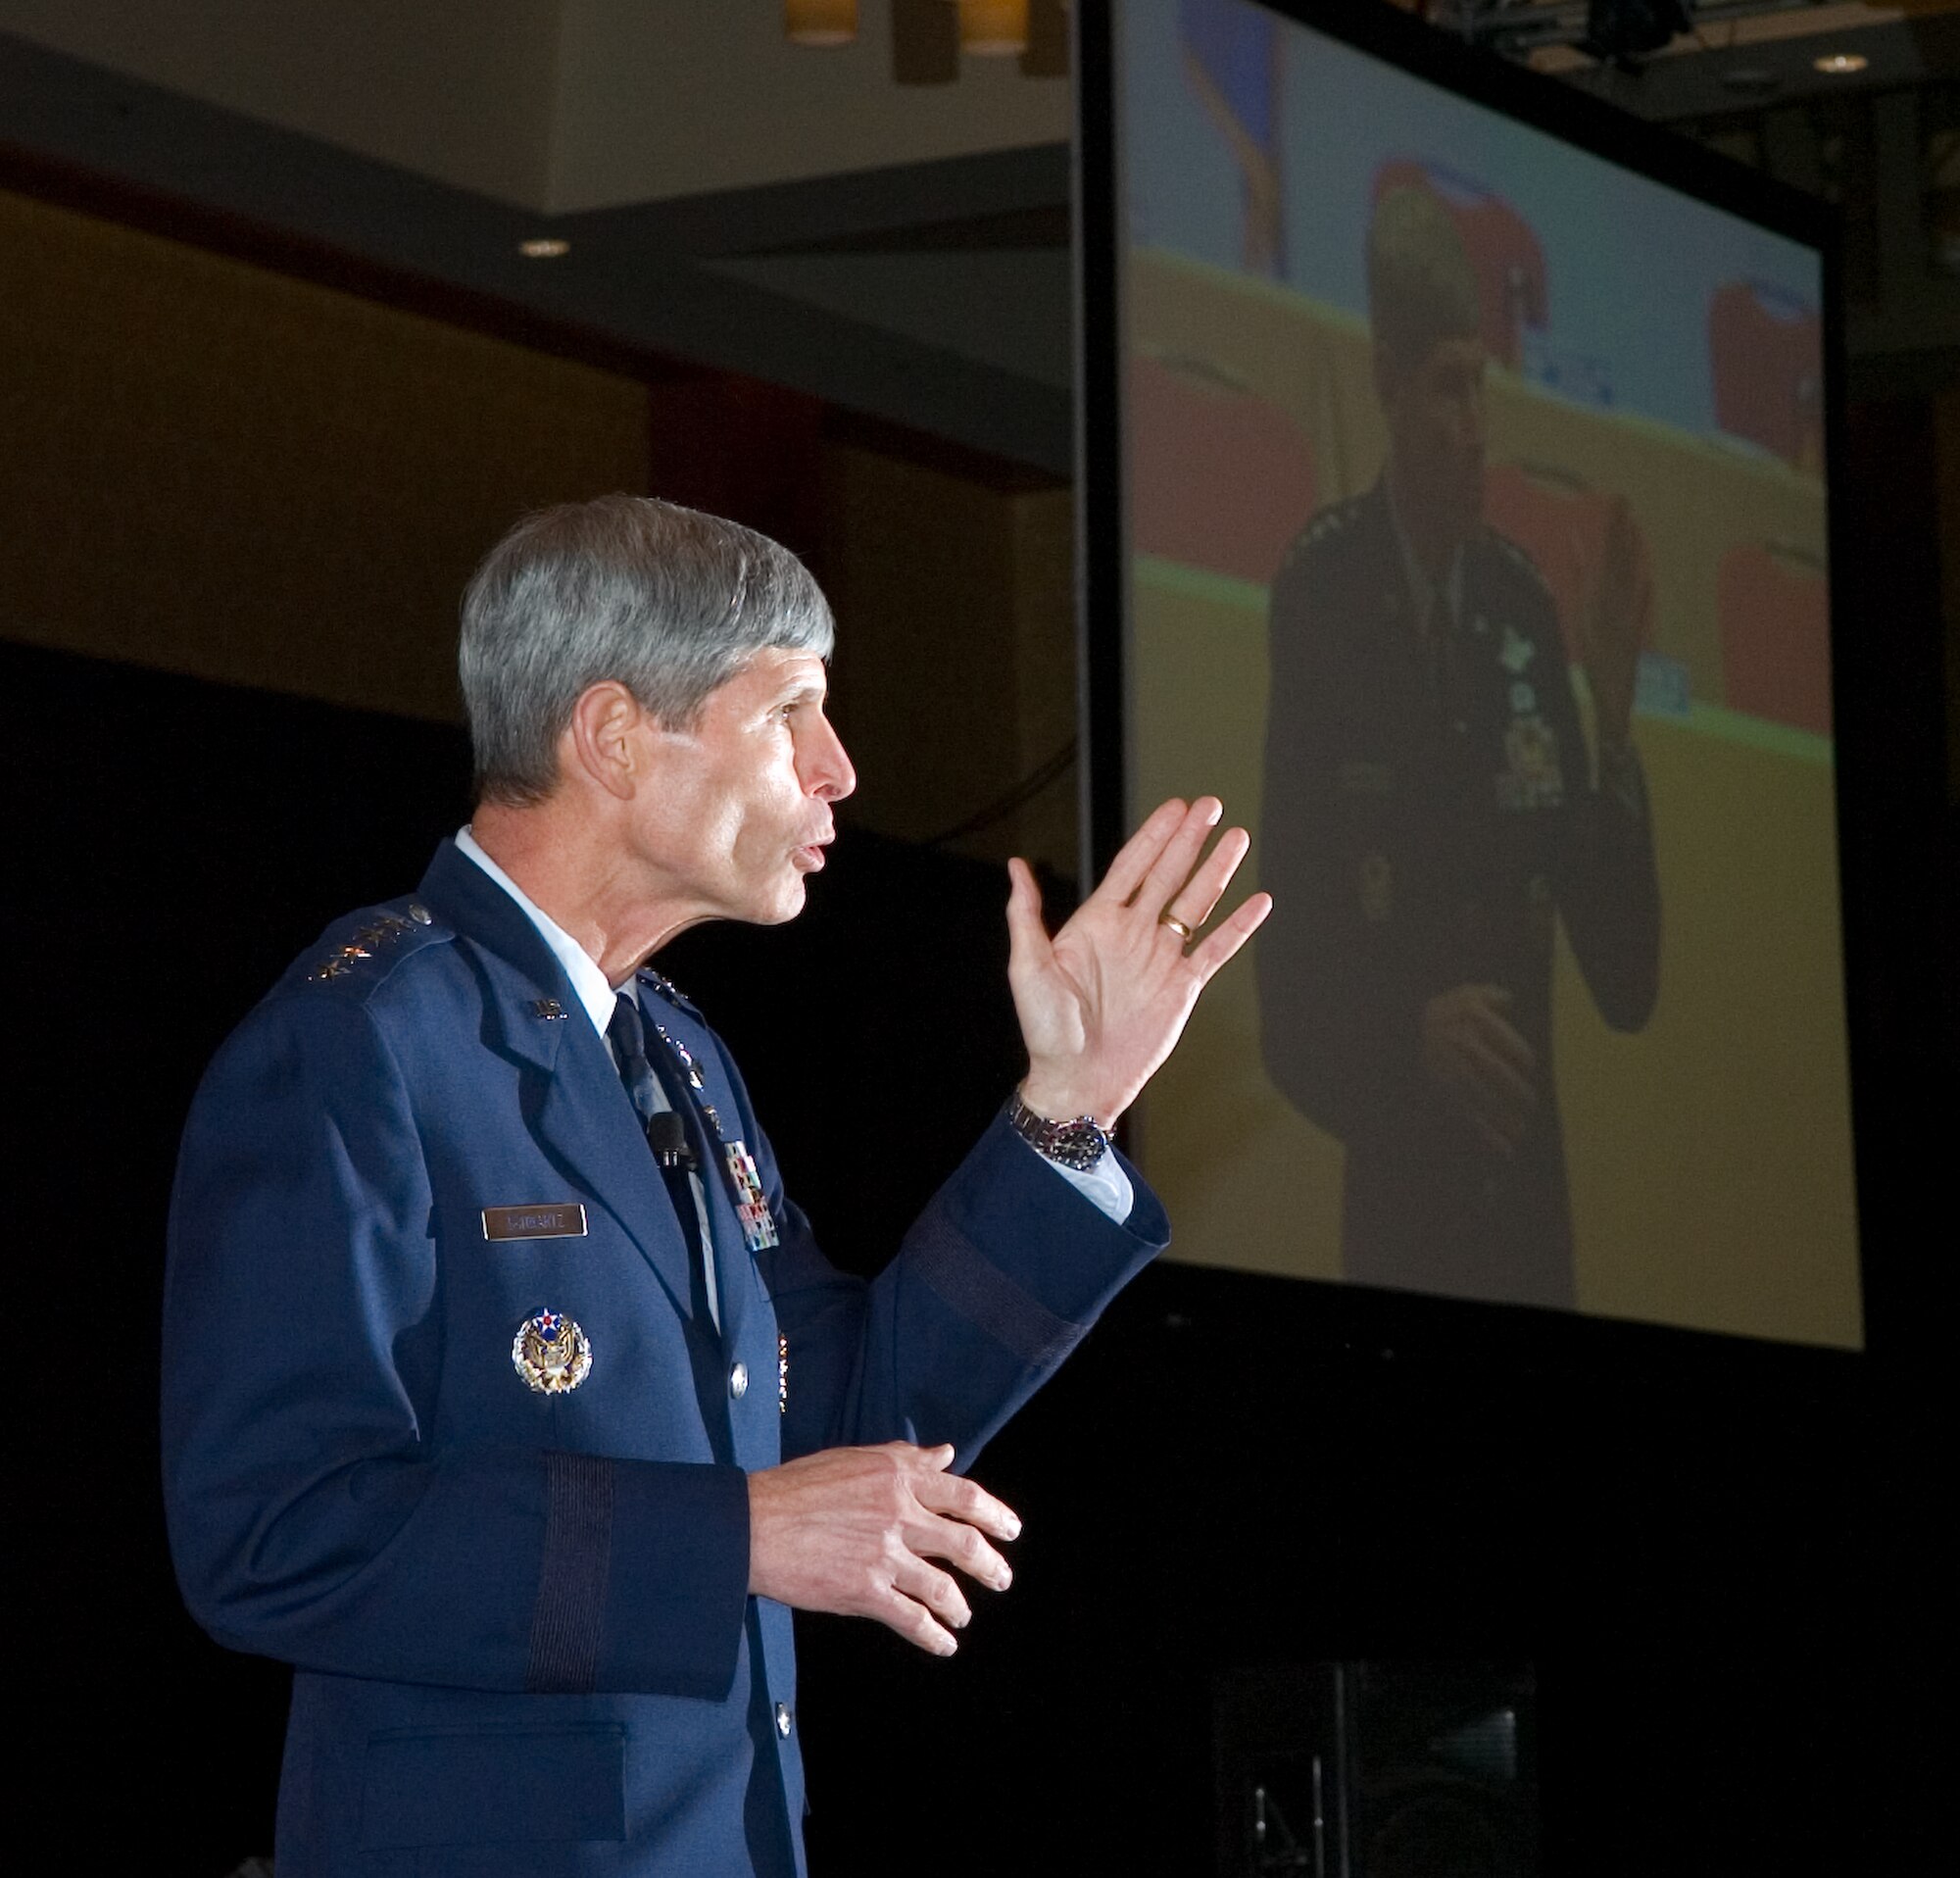 Gen. Norton Schwartz, Air Force chief of staff, delivers his keynote speech Aug. 25 at the Air Force Sergeants Association's annual Professional Airmen's Conference and International Convention in San Antonio. General Schwartz discussed his goals for the direction of the Air Force and addressed the importance of noncommissioned officer leadership. (U.S. Air Force photo/Lance Cheung)